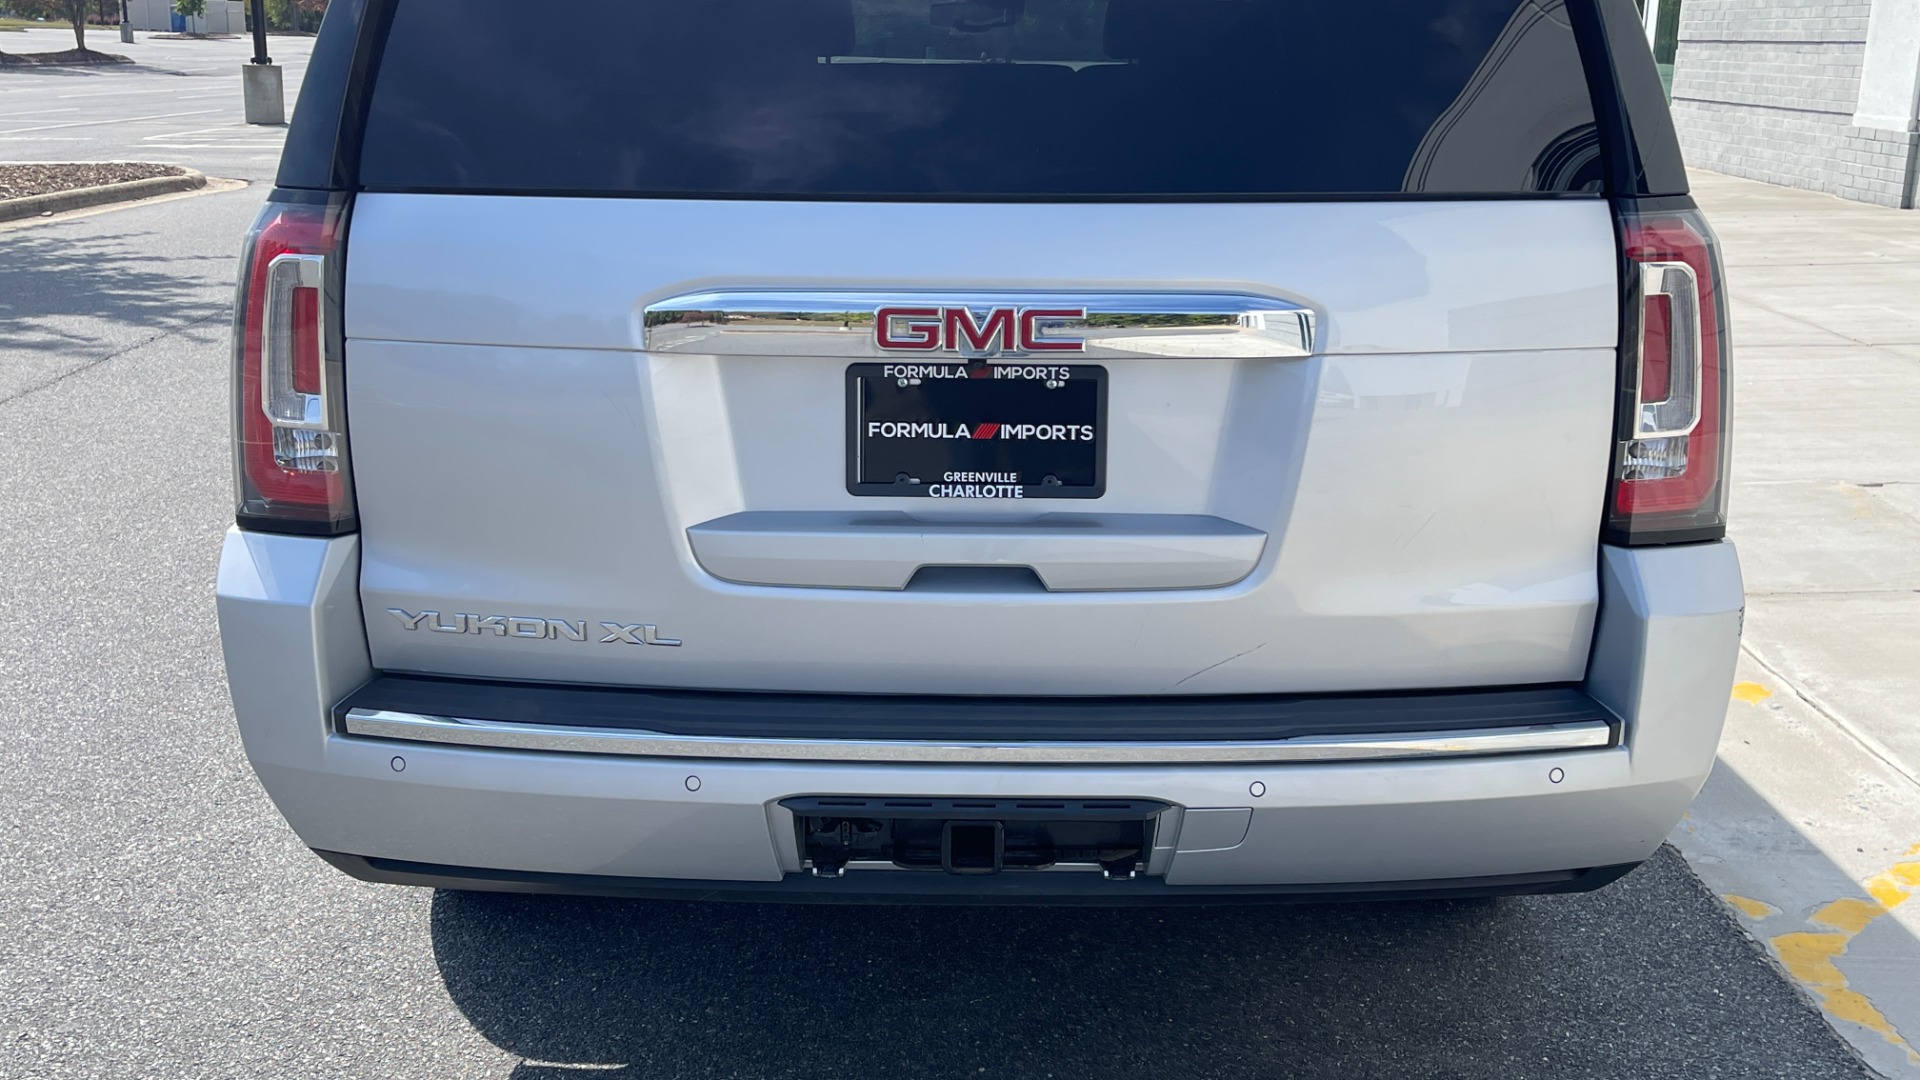 Used 2019 GMC Yukon XL DENALI / LEATHER / 4WD / CAPTAINS CHAIRS / 3 ROW SEATING for sale $55,000 at Formula Imports in Charlotte NC 28227 8